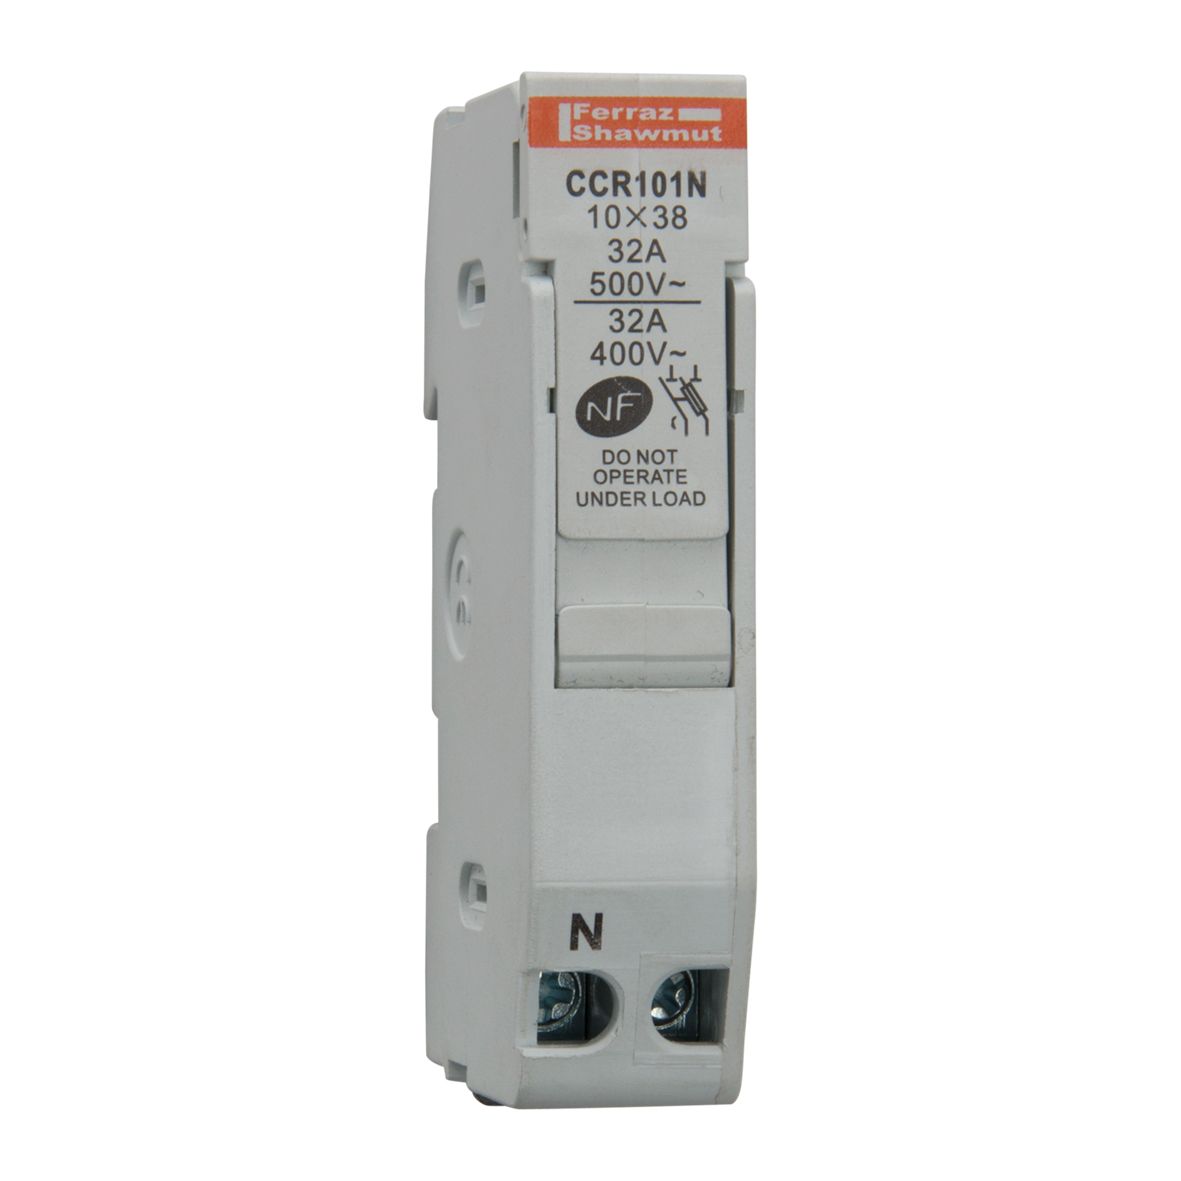 H215655 - compact fuse holder, IEC, 1P+N, 10x38, DIN rail mounting~